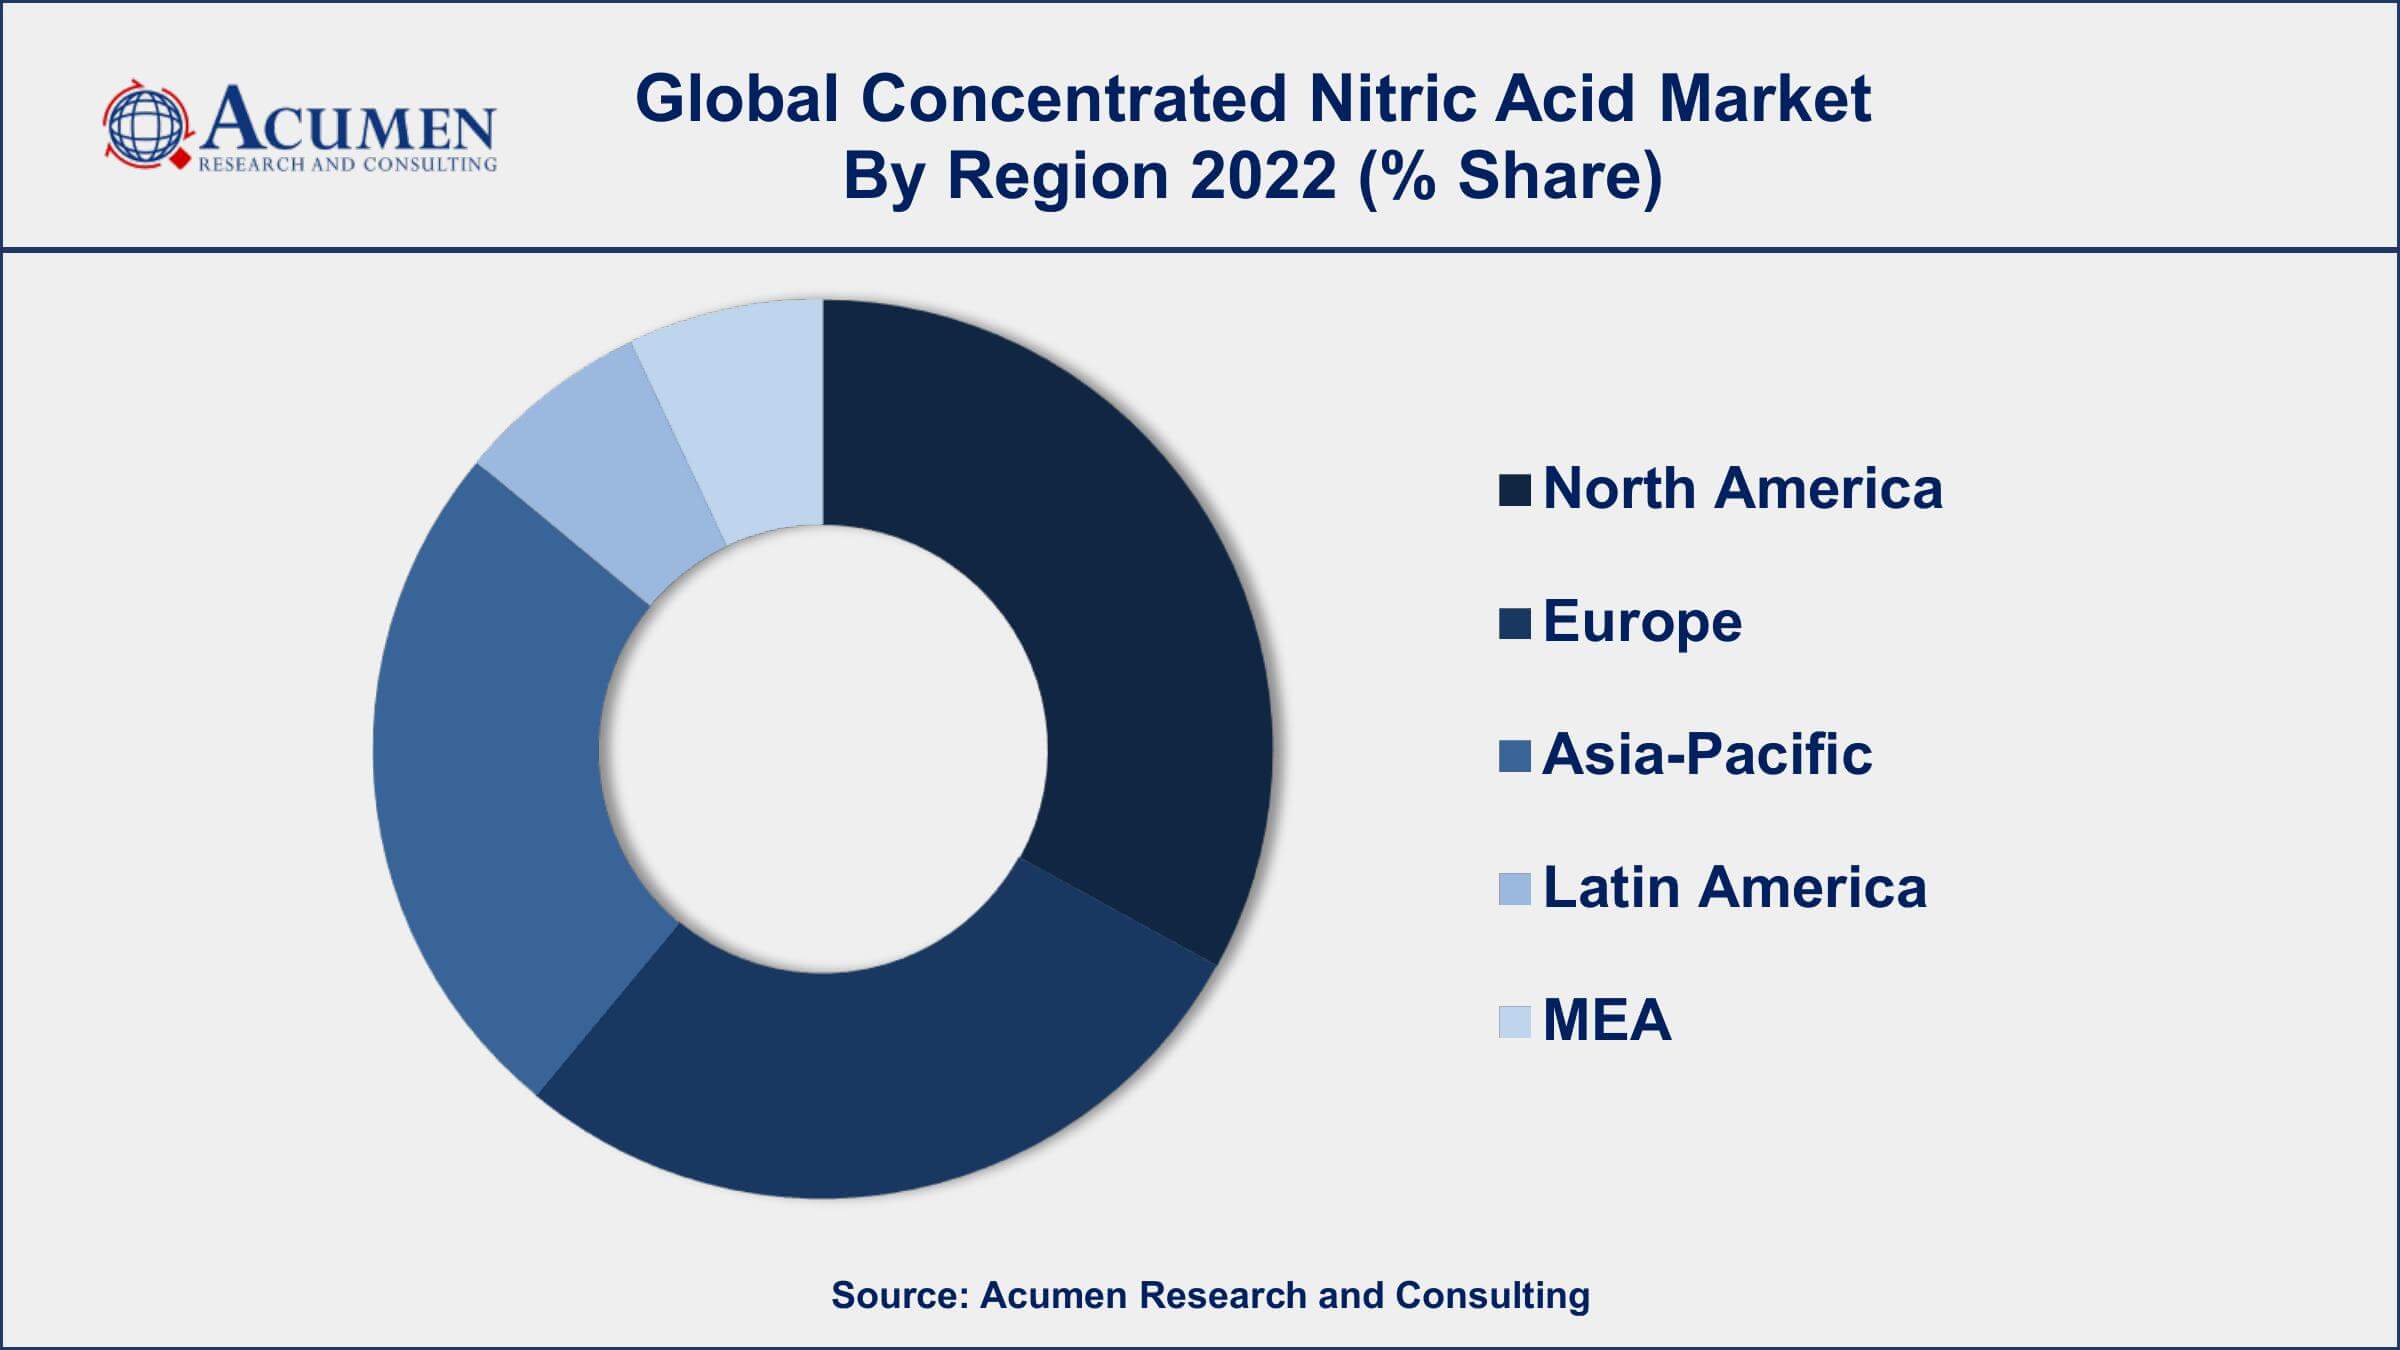 Concentrated Nitric Acid Market Drivers